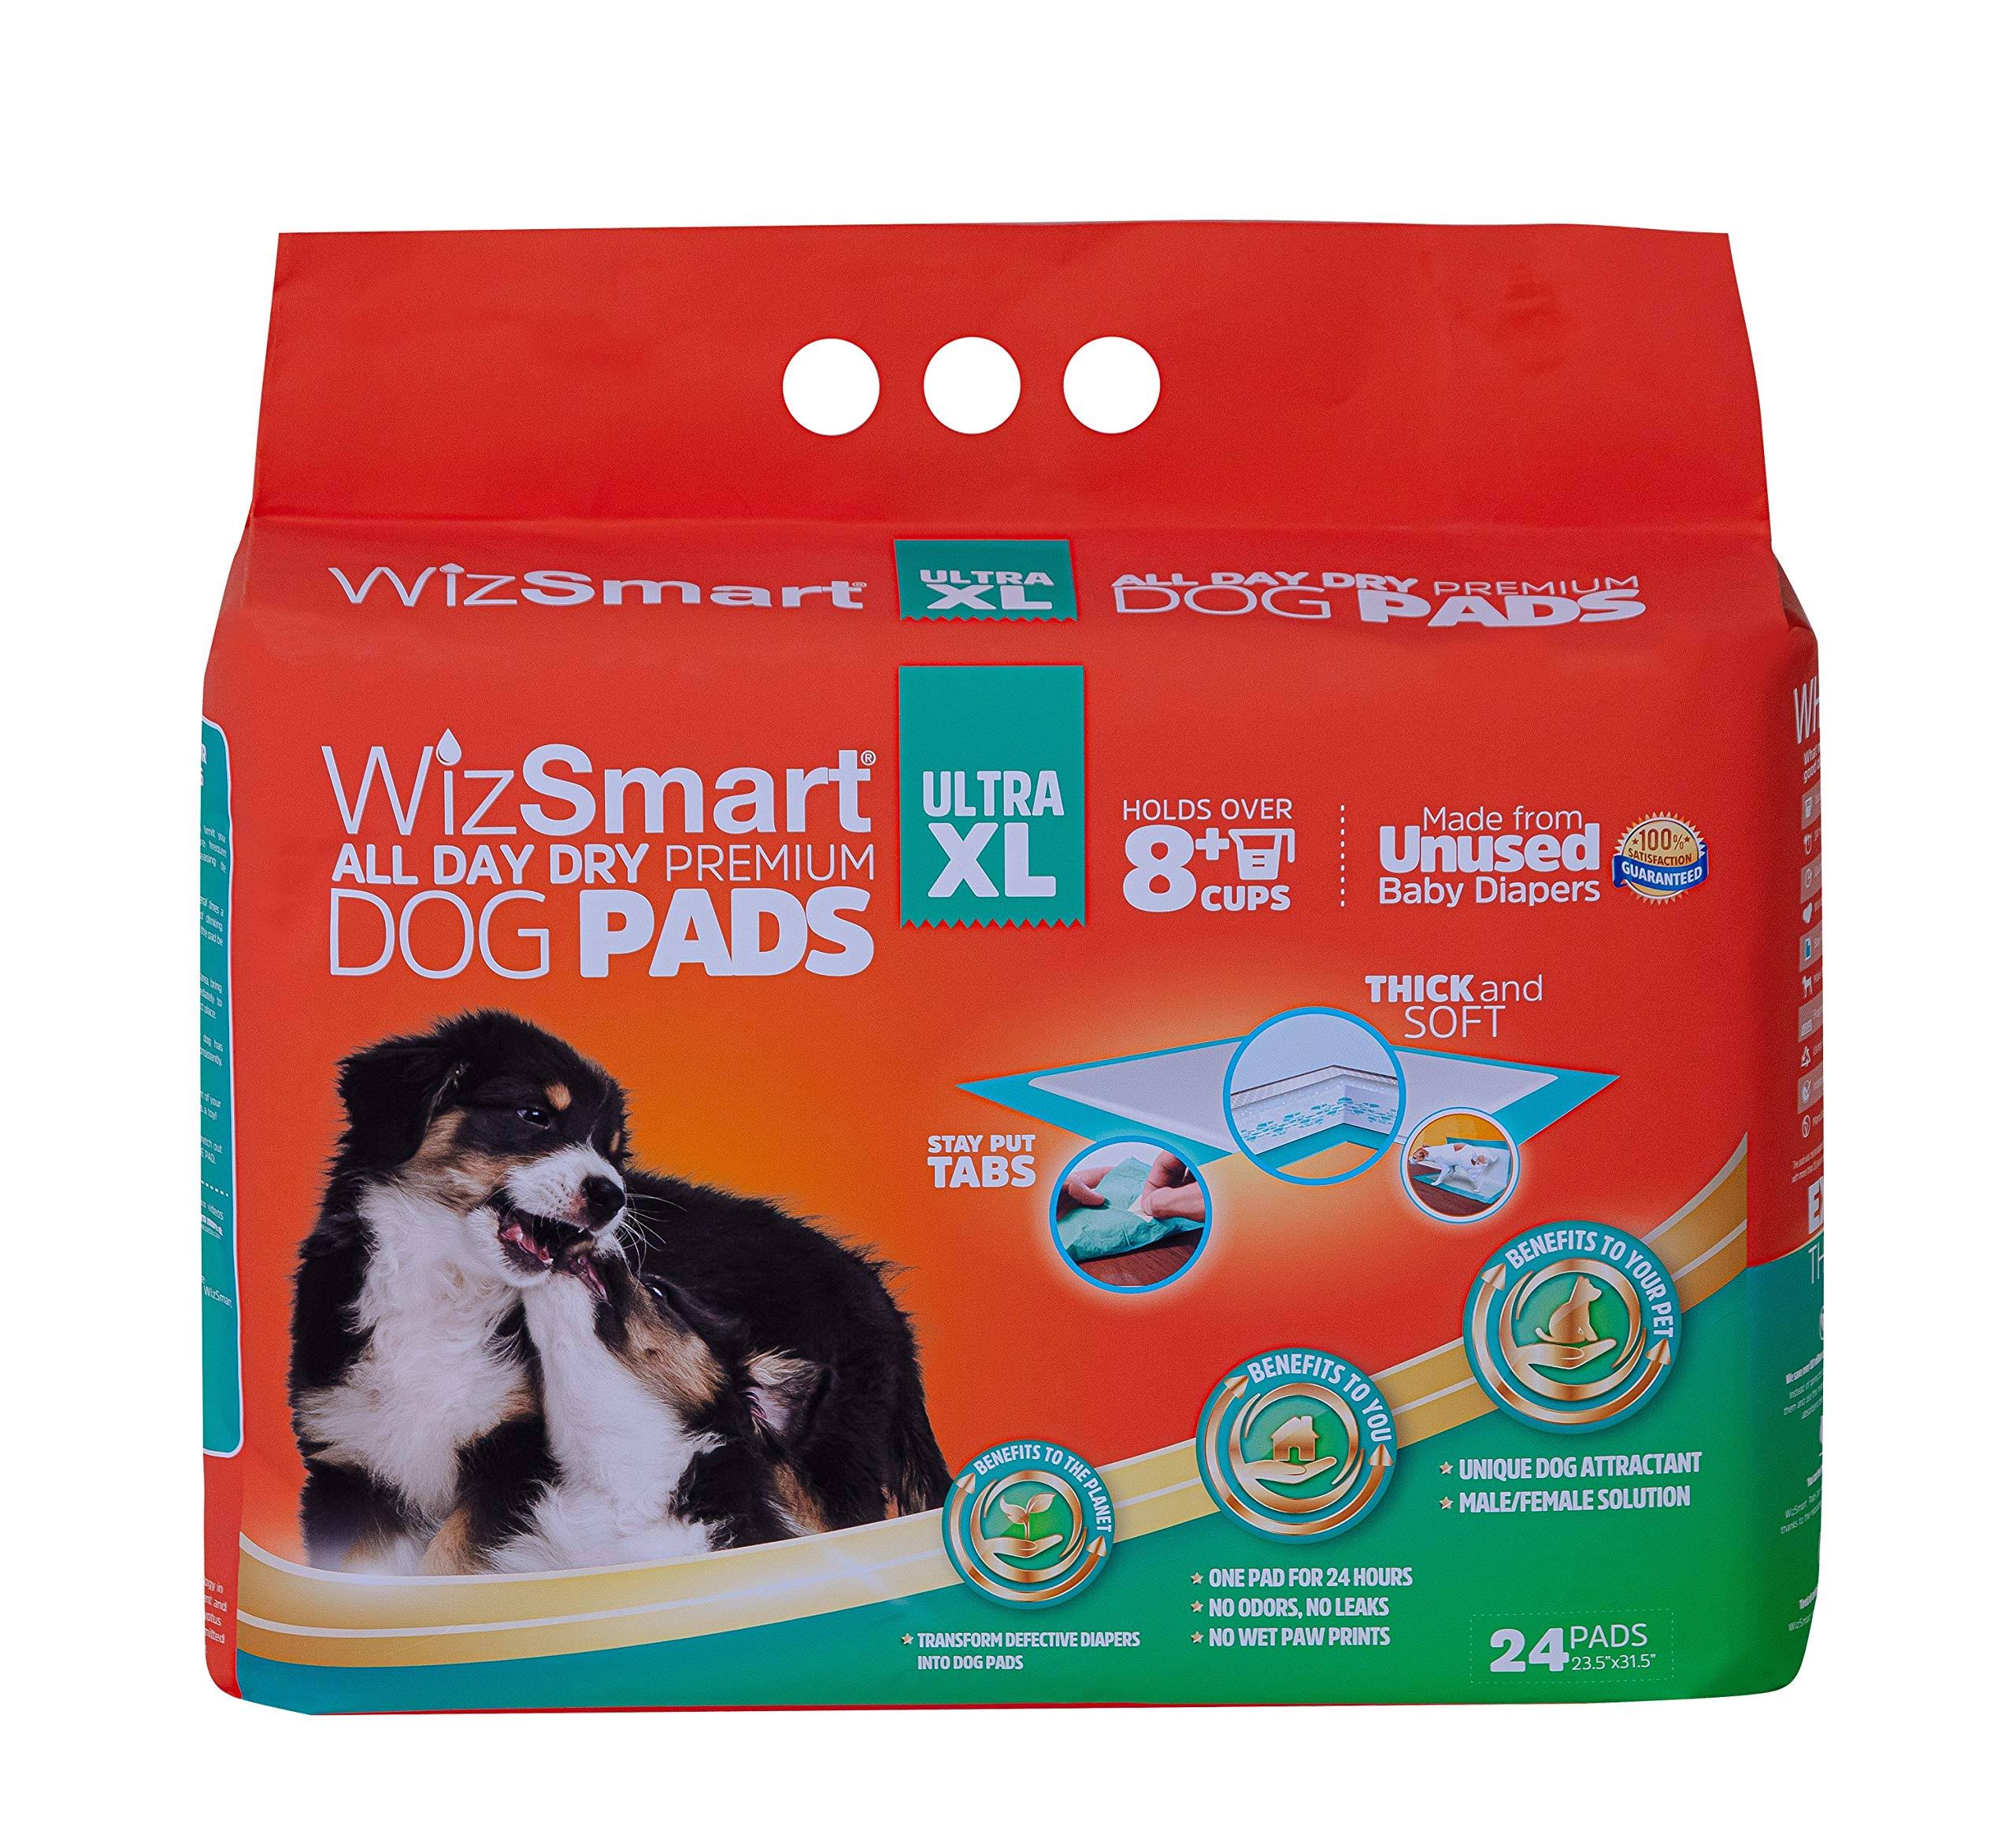 WizSmart All Day Dry Premium Dog and Puppy Training Pads, Made with Recycled Unused Baby Diapers and Eco Friendly Materials (10 Cup Ultra XL, 24 ct)